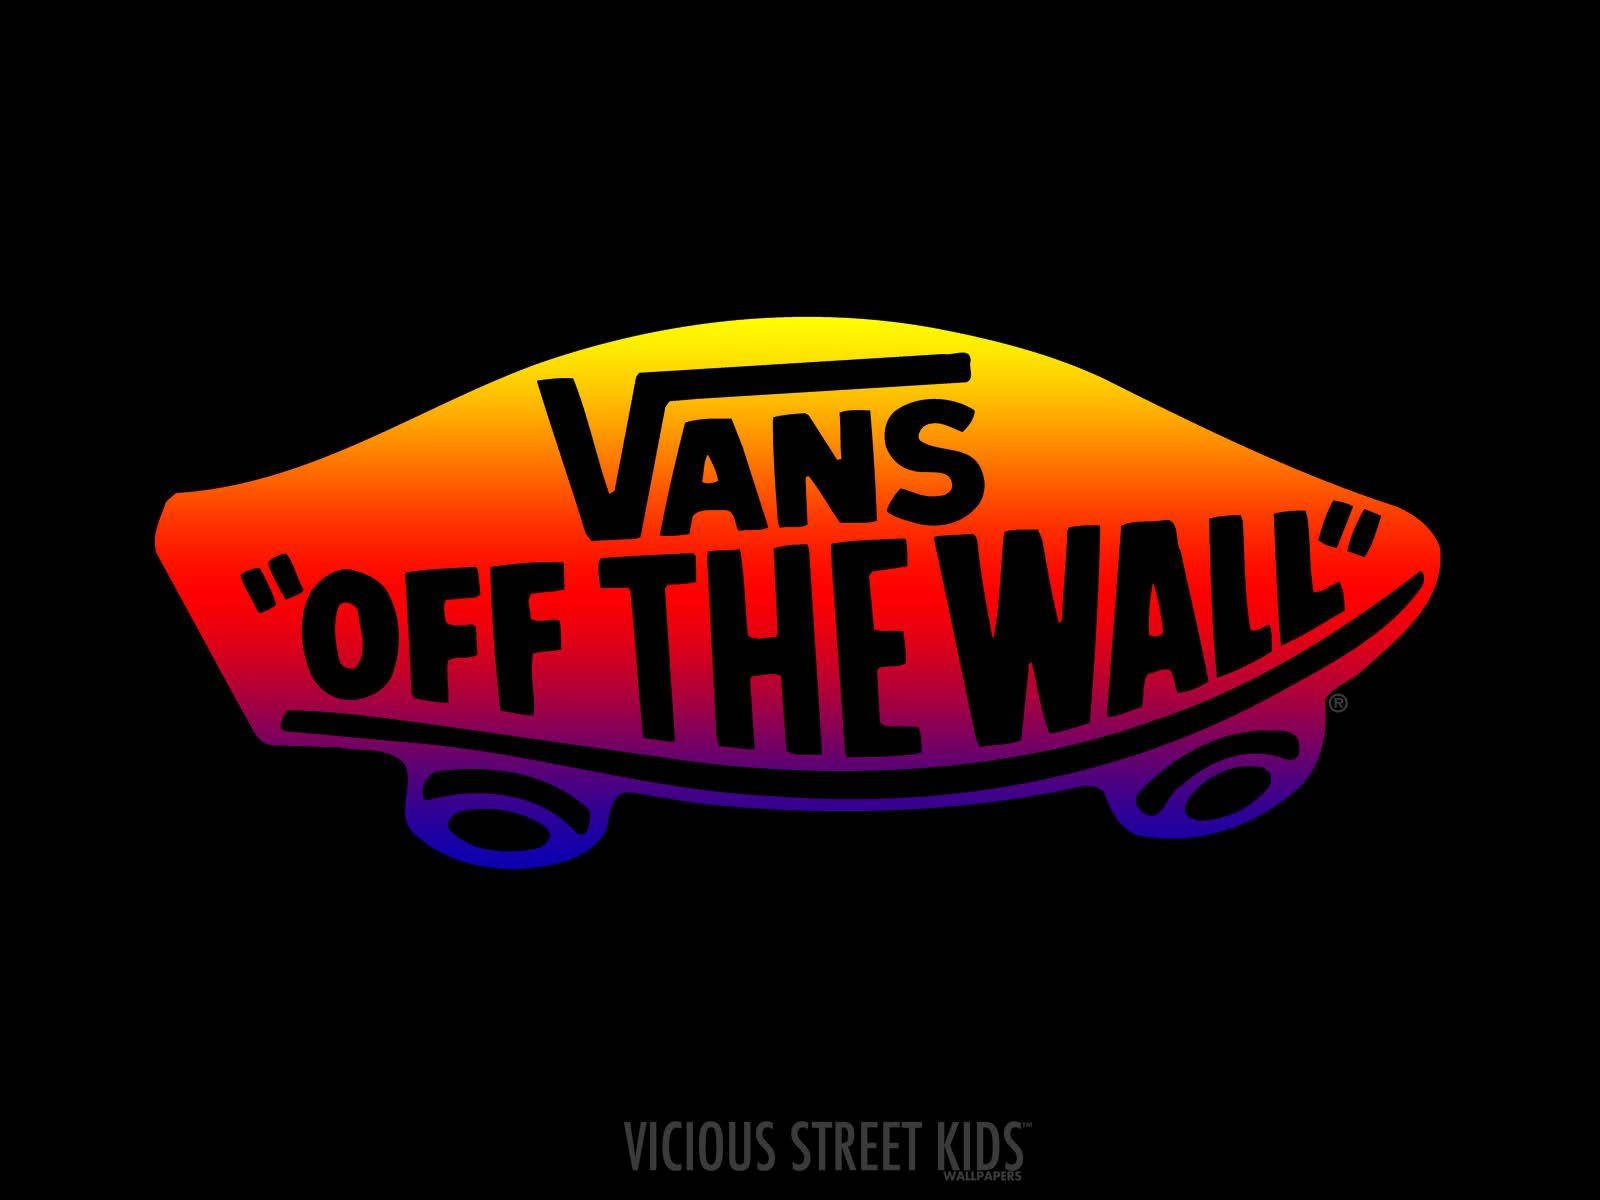 The Colorful Vans Off The Wall Logo: A Symbol of Infinite Possibilities Wallpaper